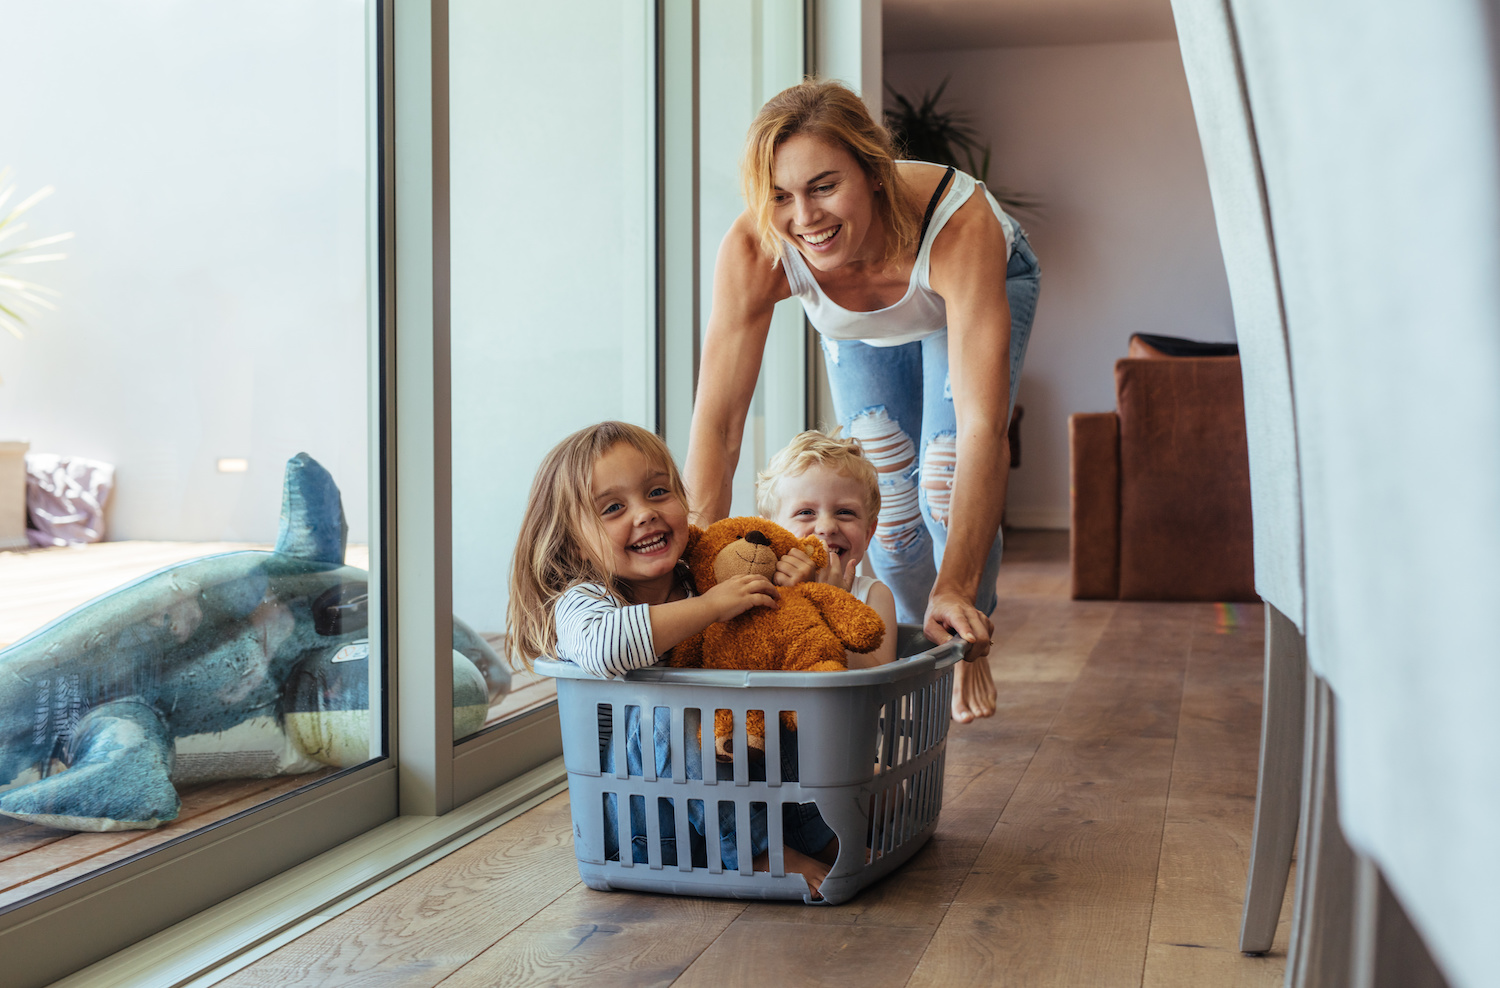 Happy young mother pushing children sitting in laundry basket. Mother and children playing at home.